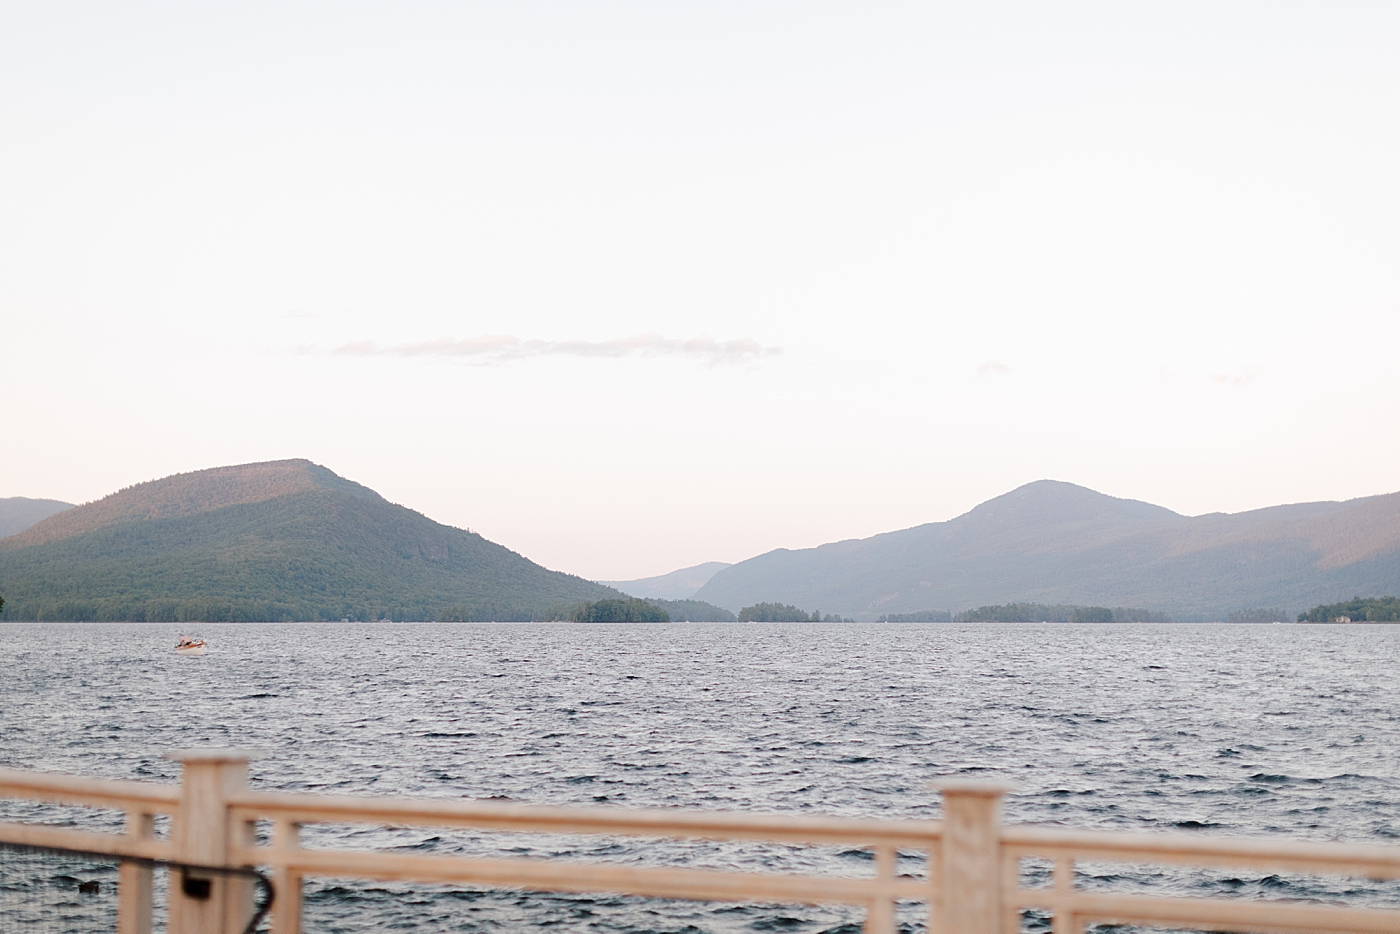 Location image of harbor at sunset with mountains in the background | Image by Hope Helmuth Photography